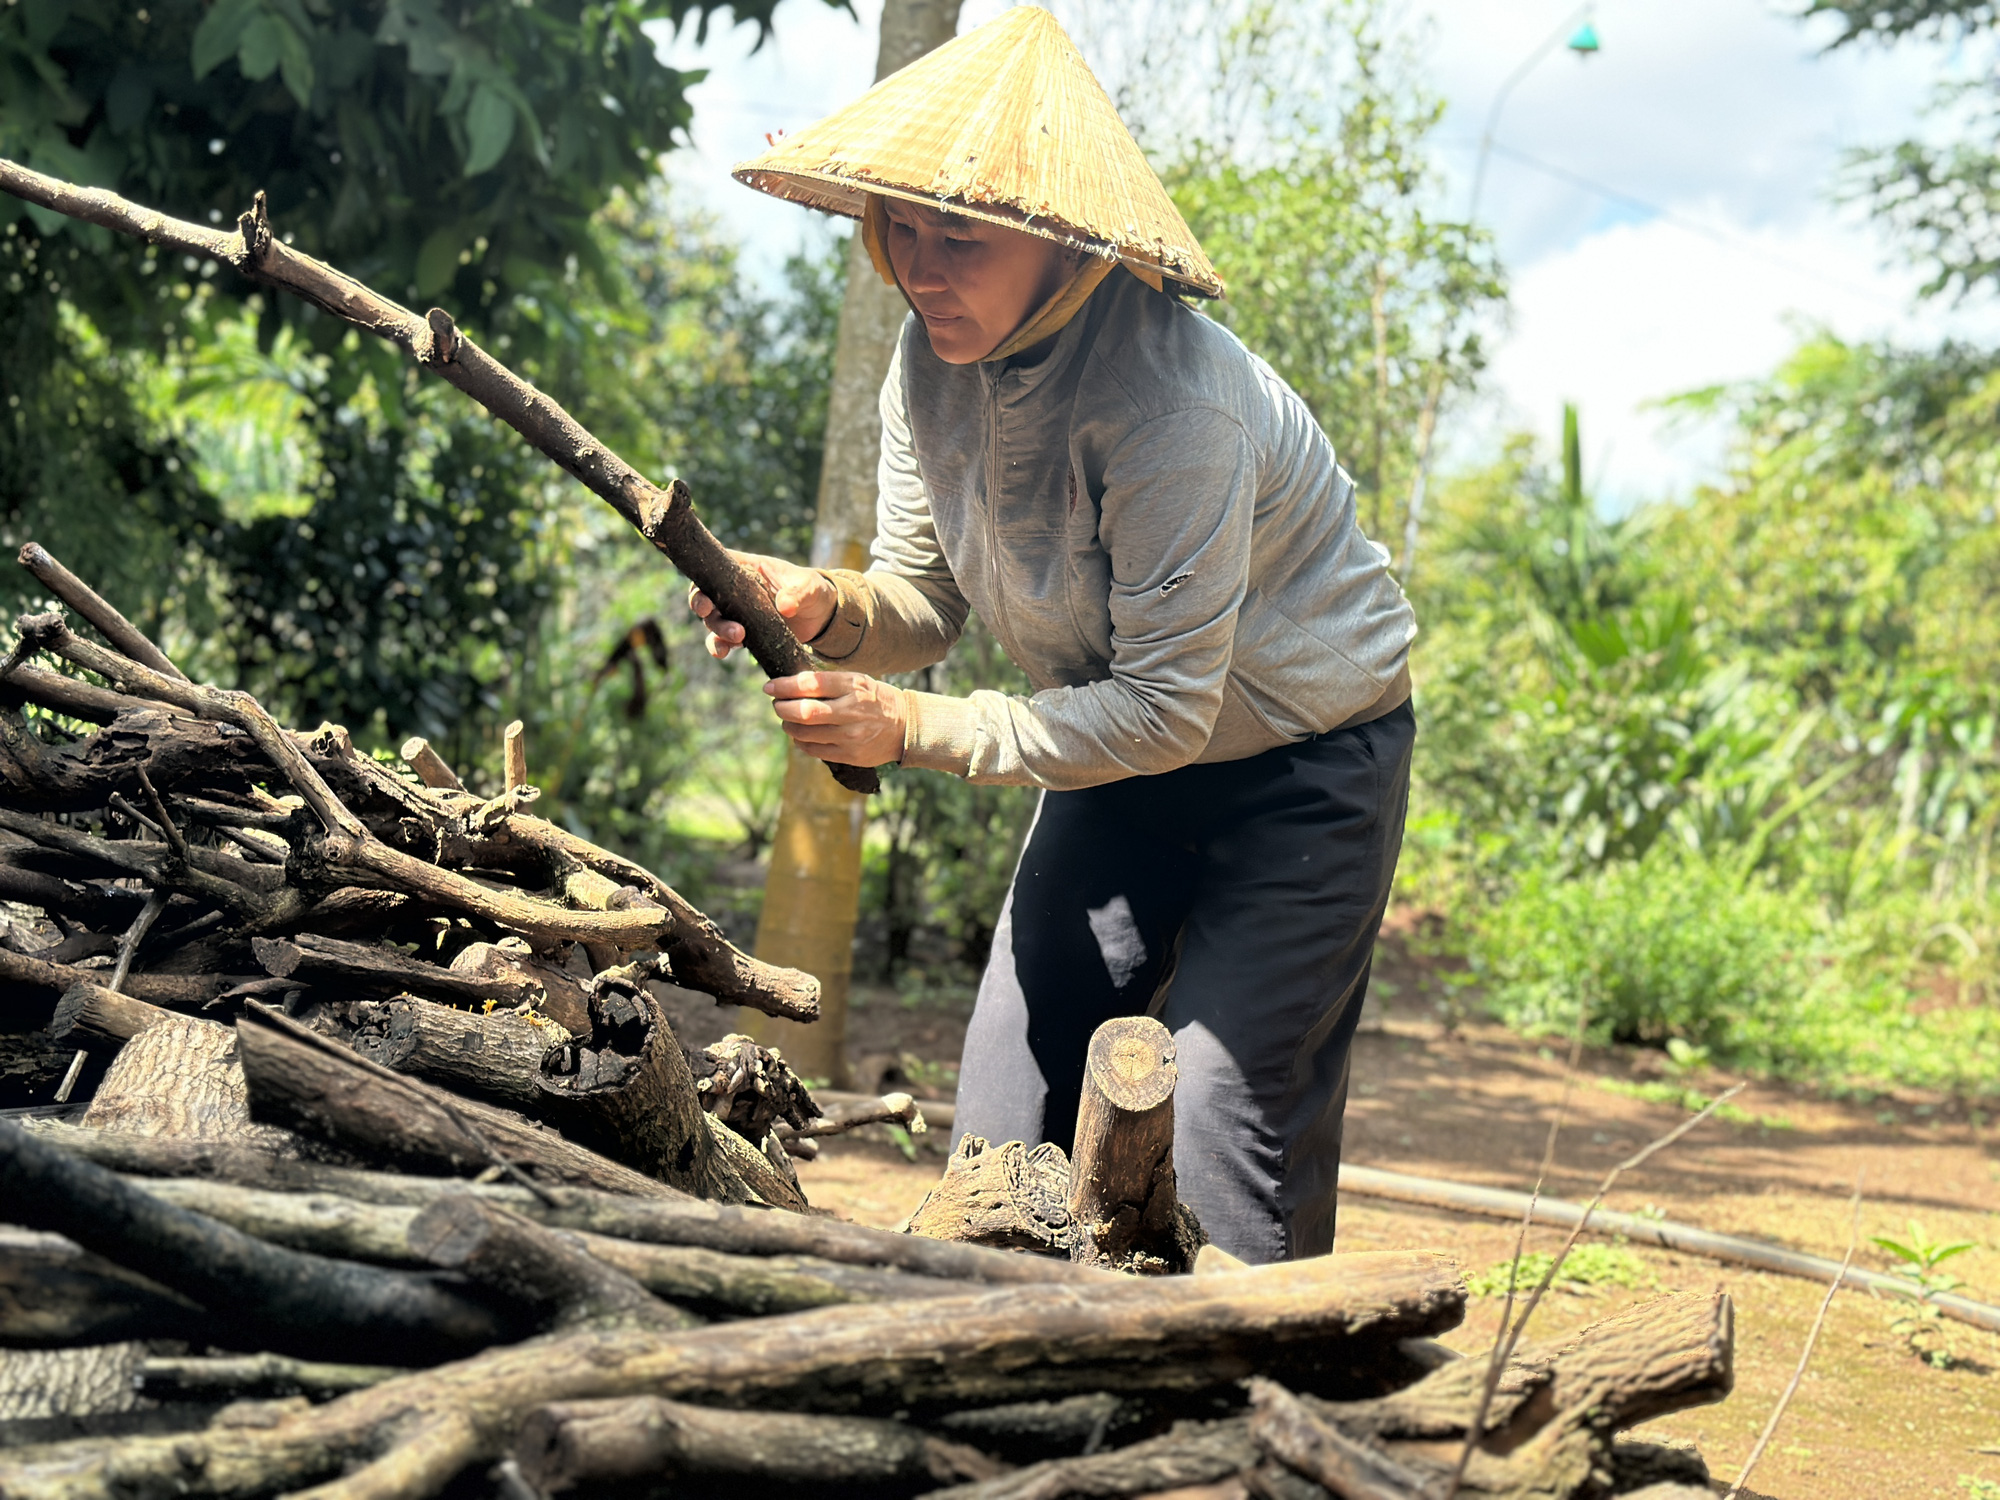 Mrs. Tran Thi Vinh (Hung's mother) takes advantage of cultivating the soil at the base of the fruit trees when not working - Photo: The